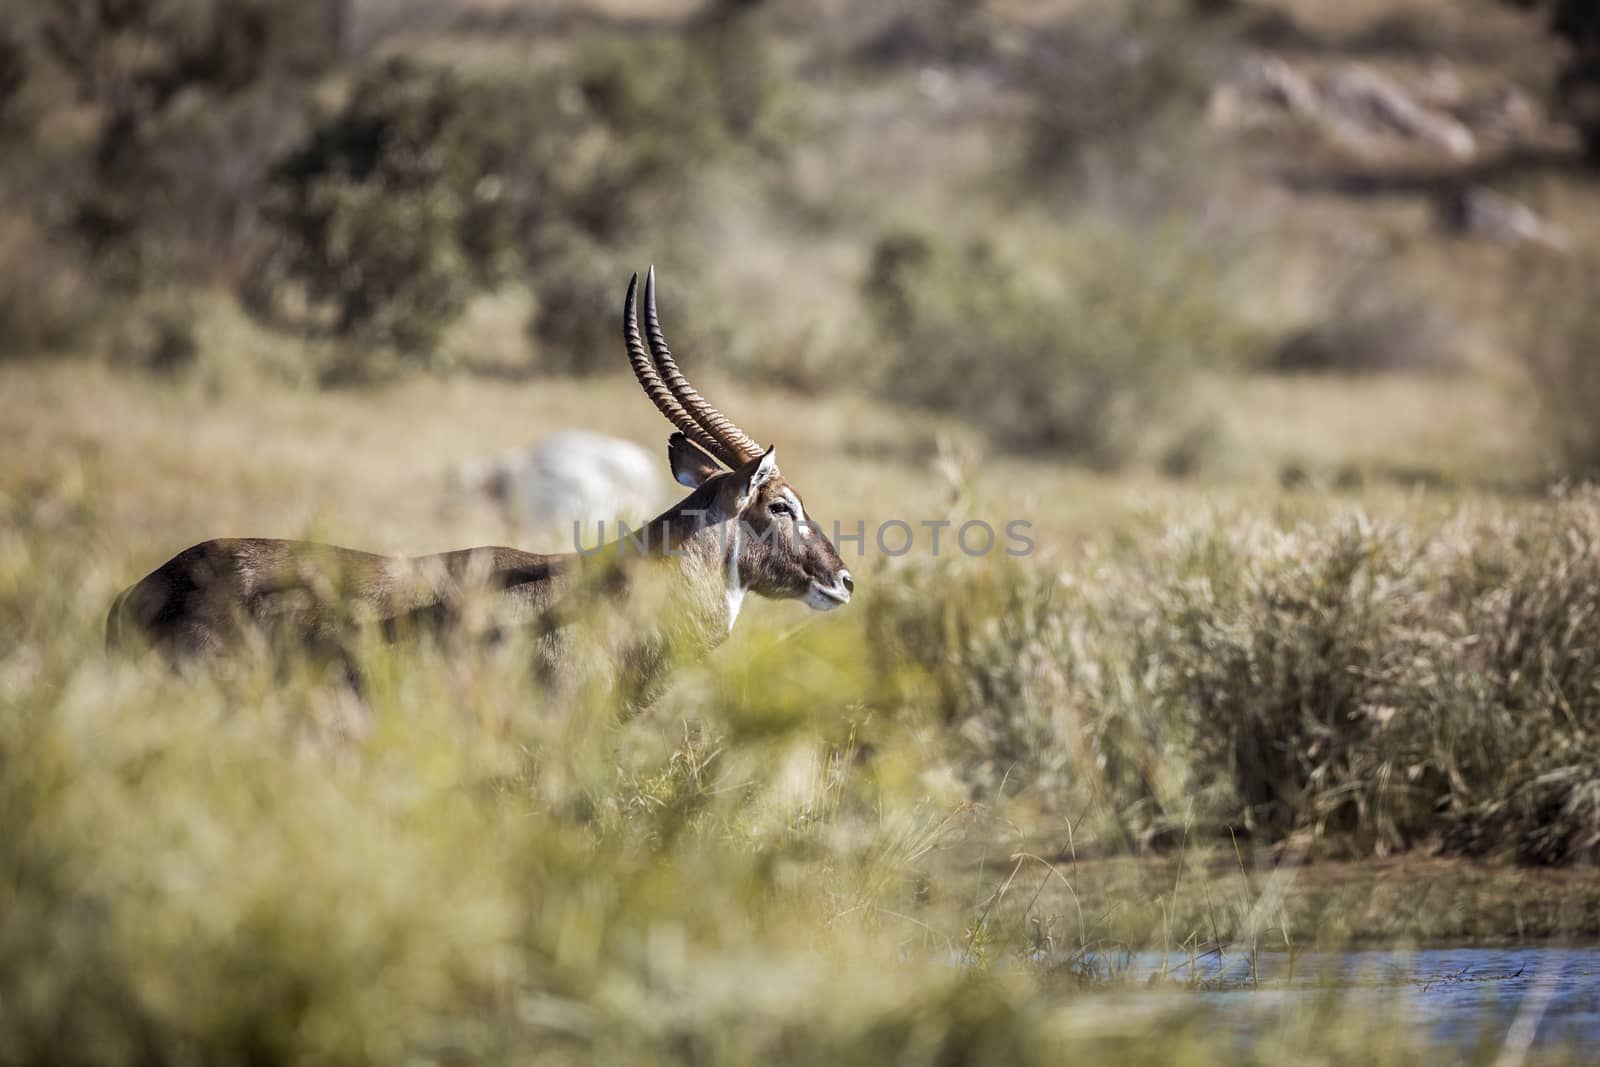 Common Waterbuck male in blur foreground in Kruger National park, South Africa ; Specie Kobus ellipsiprymnus family of Bovidae